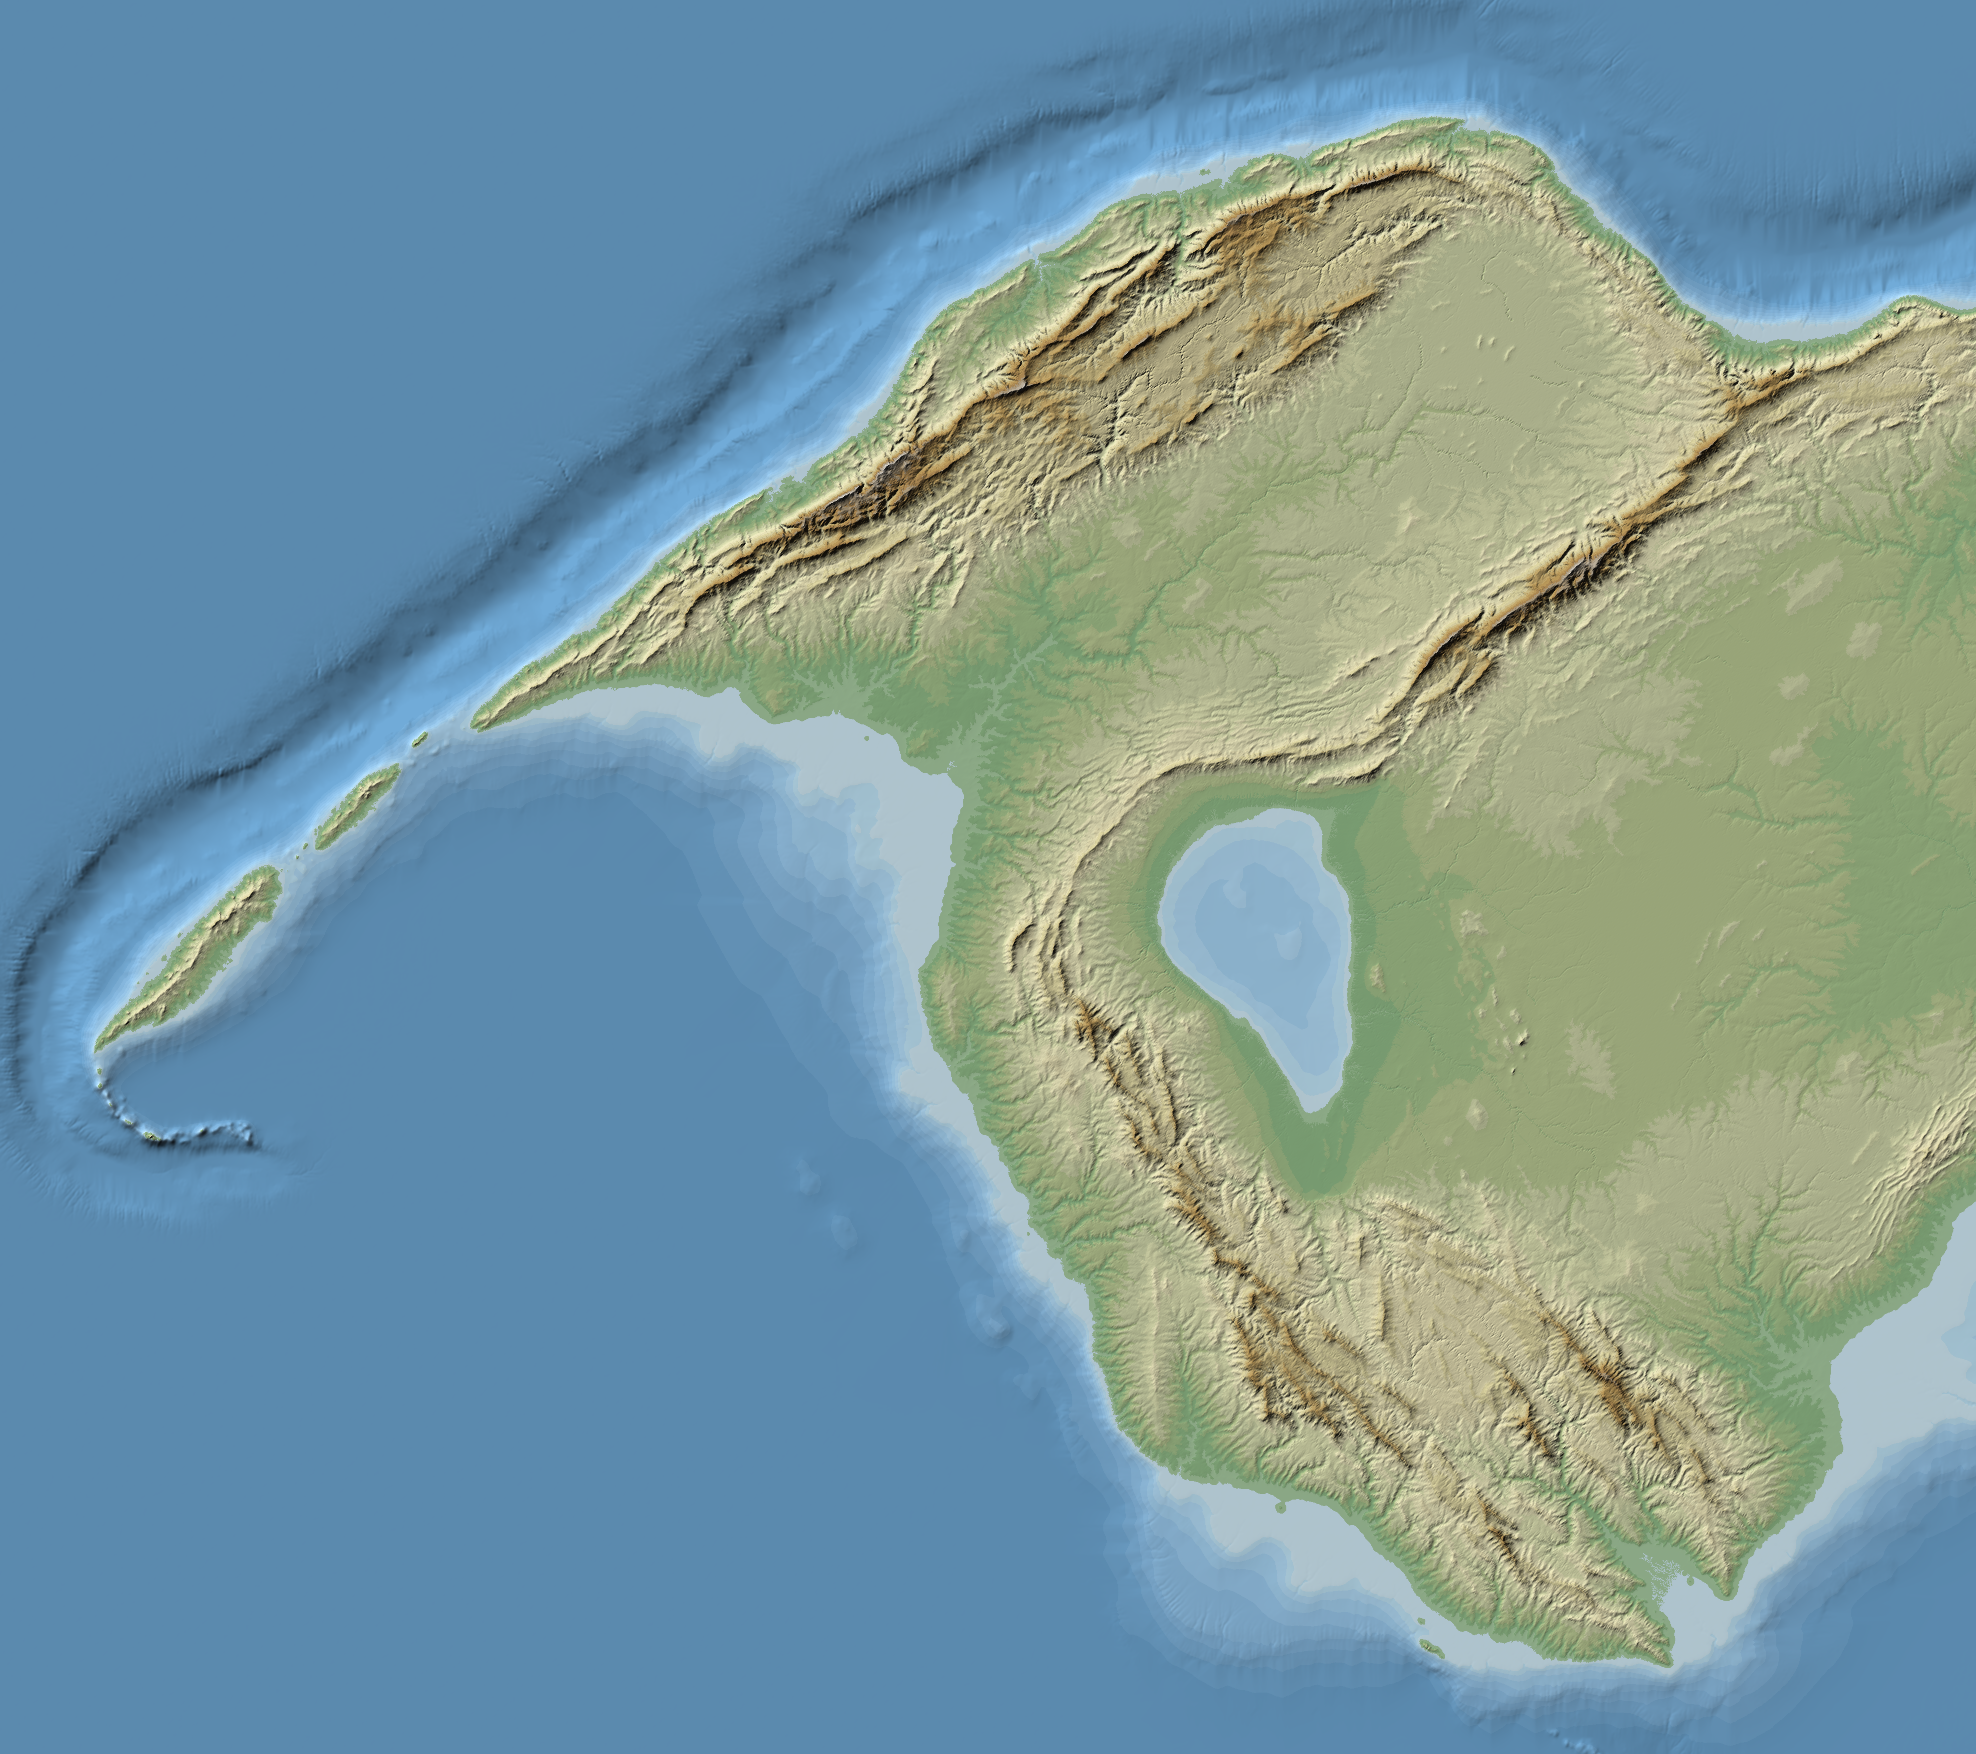 Working on a map for a new worldbuilding project. Gonna trace over